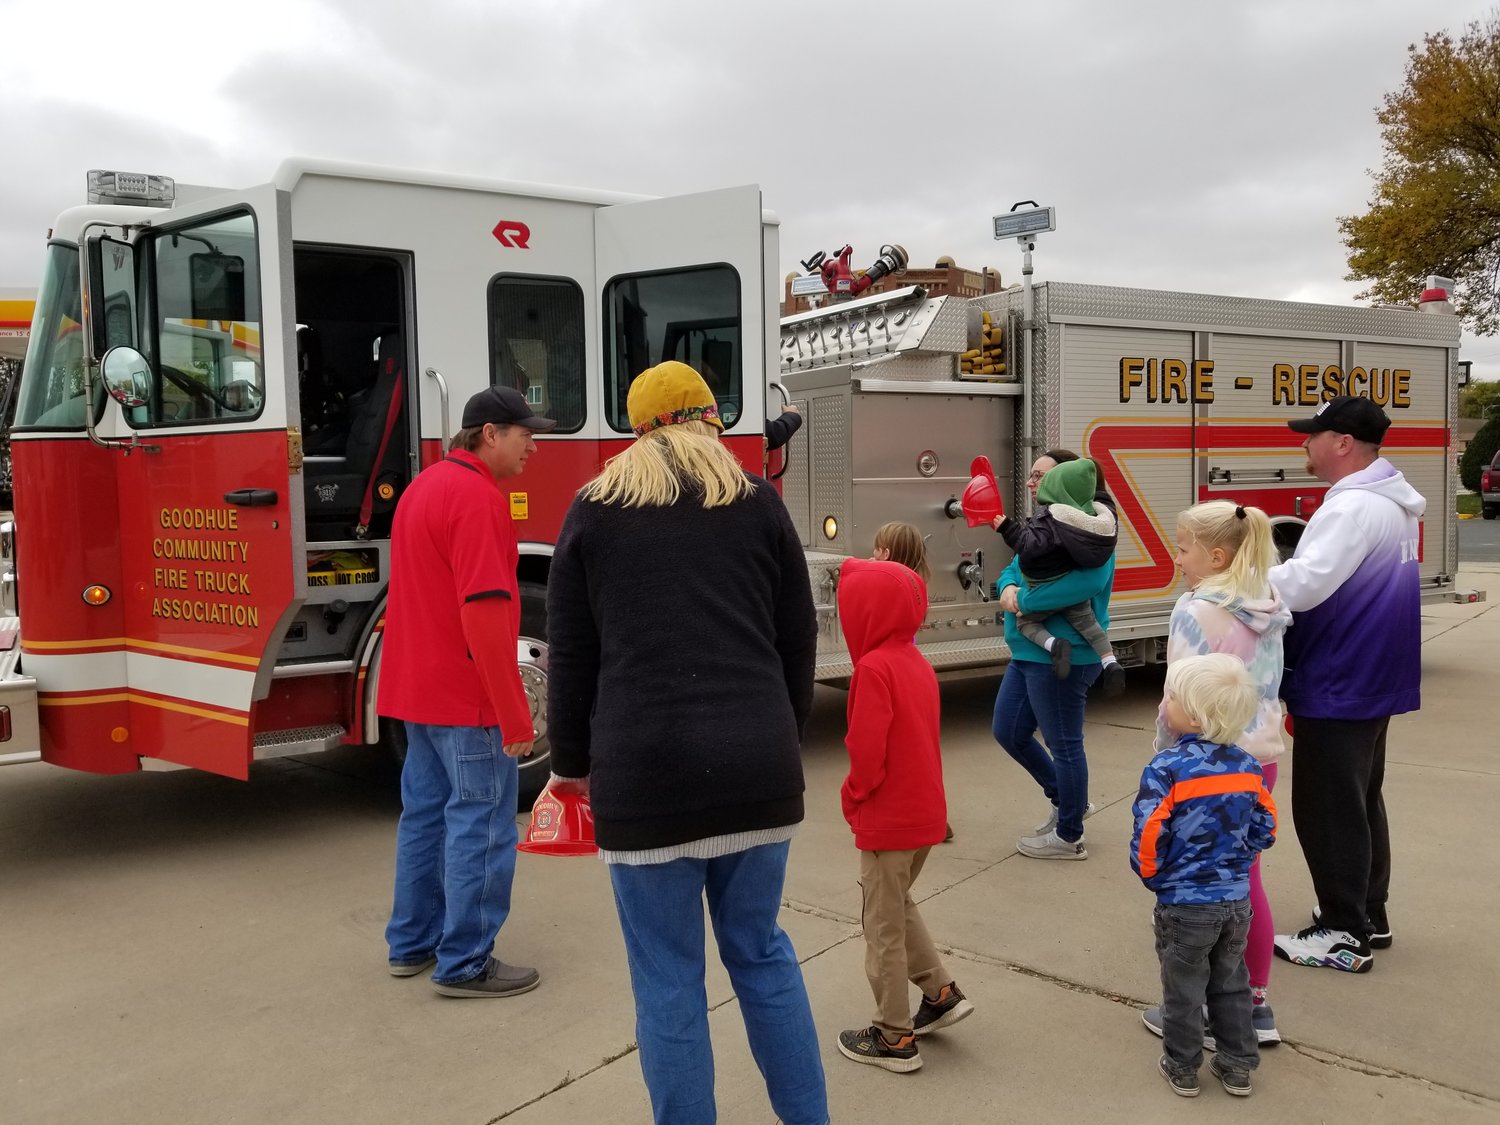 Goodhue Fire Department member, Jason Arendt, assists a group of parents and kids entering the fire truck for a ride around town.  This educational experience was a popular attraction during the annual open house.